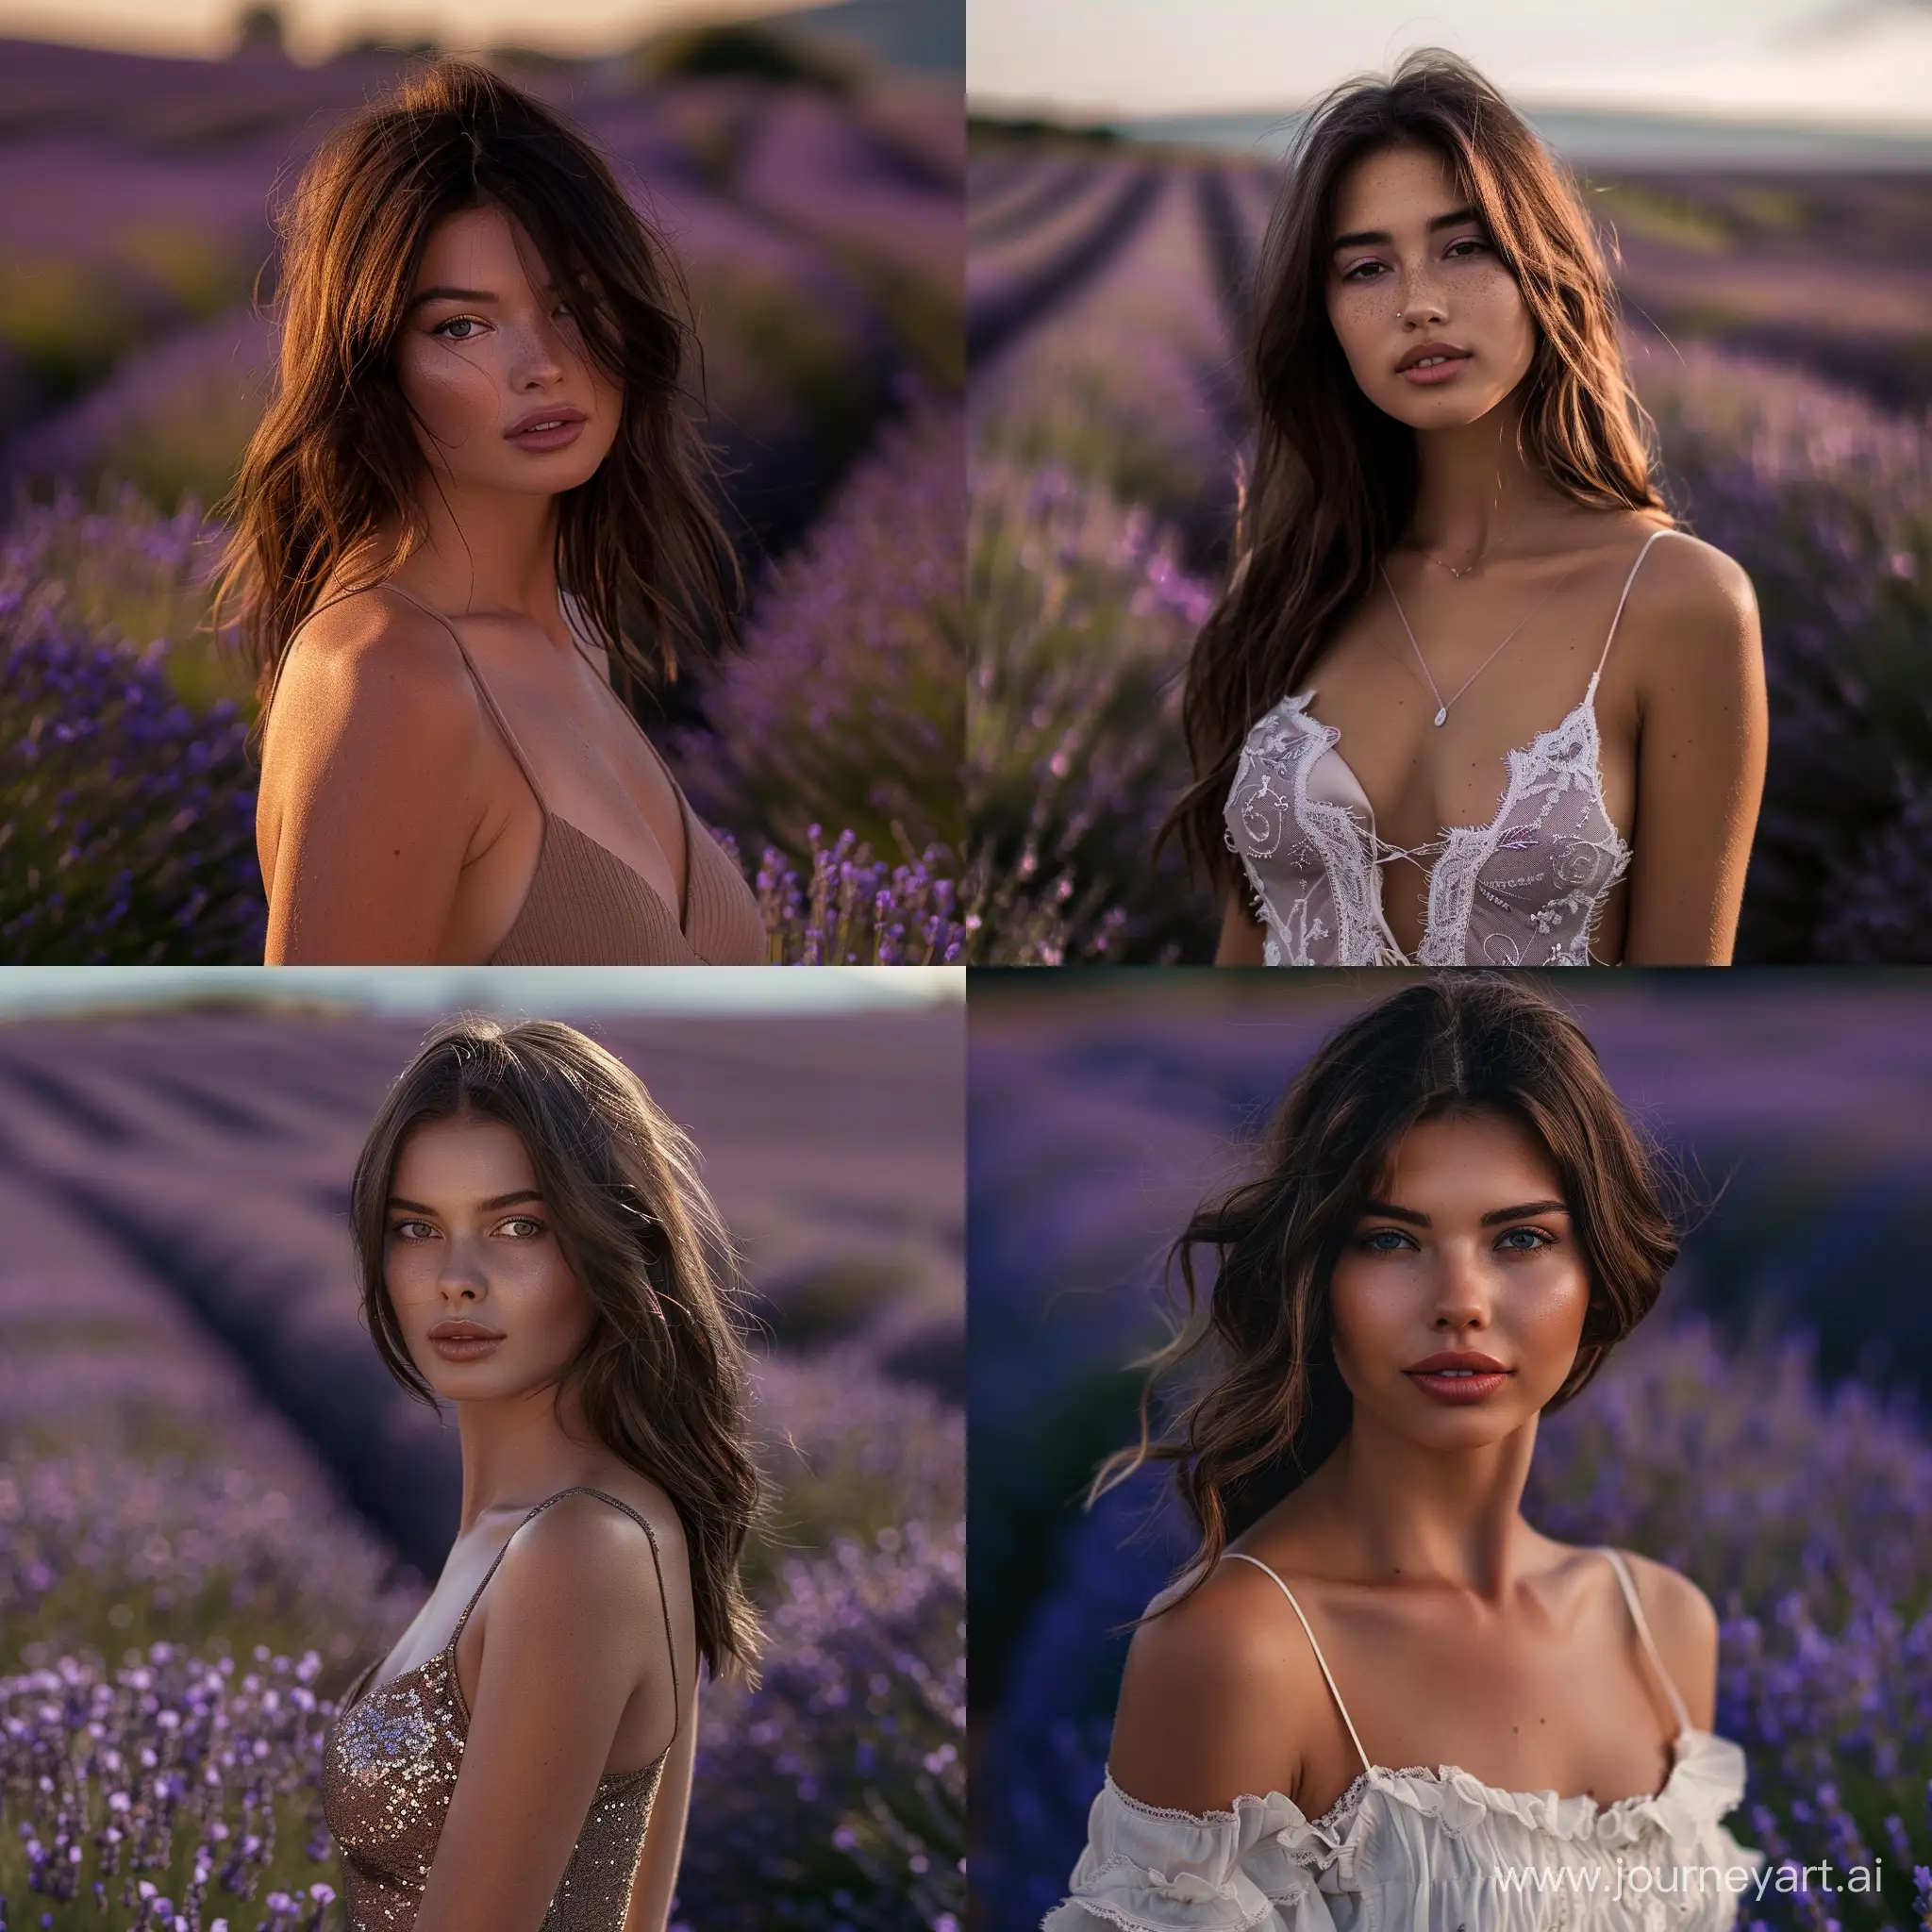 hour glass physique, slim brunette model that dose not exist in real life, standing in a lavender field, slight smirk